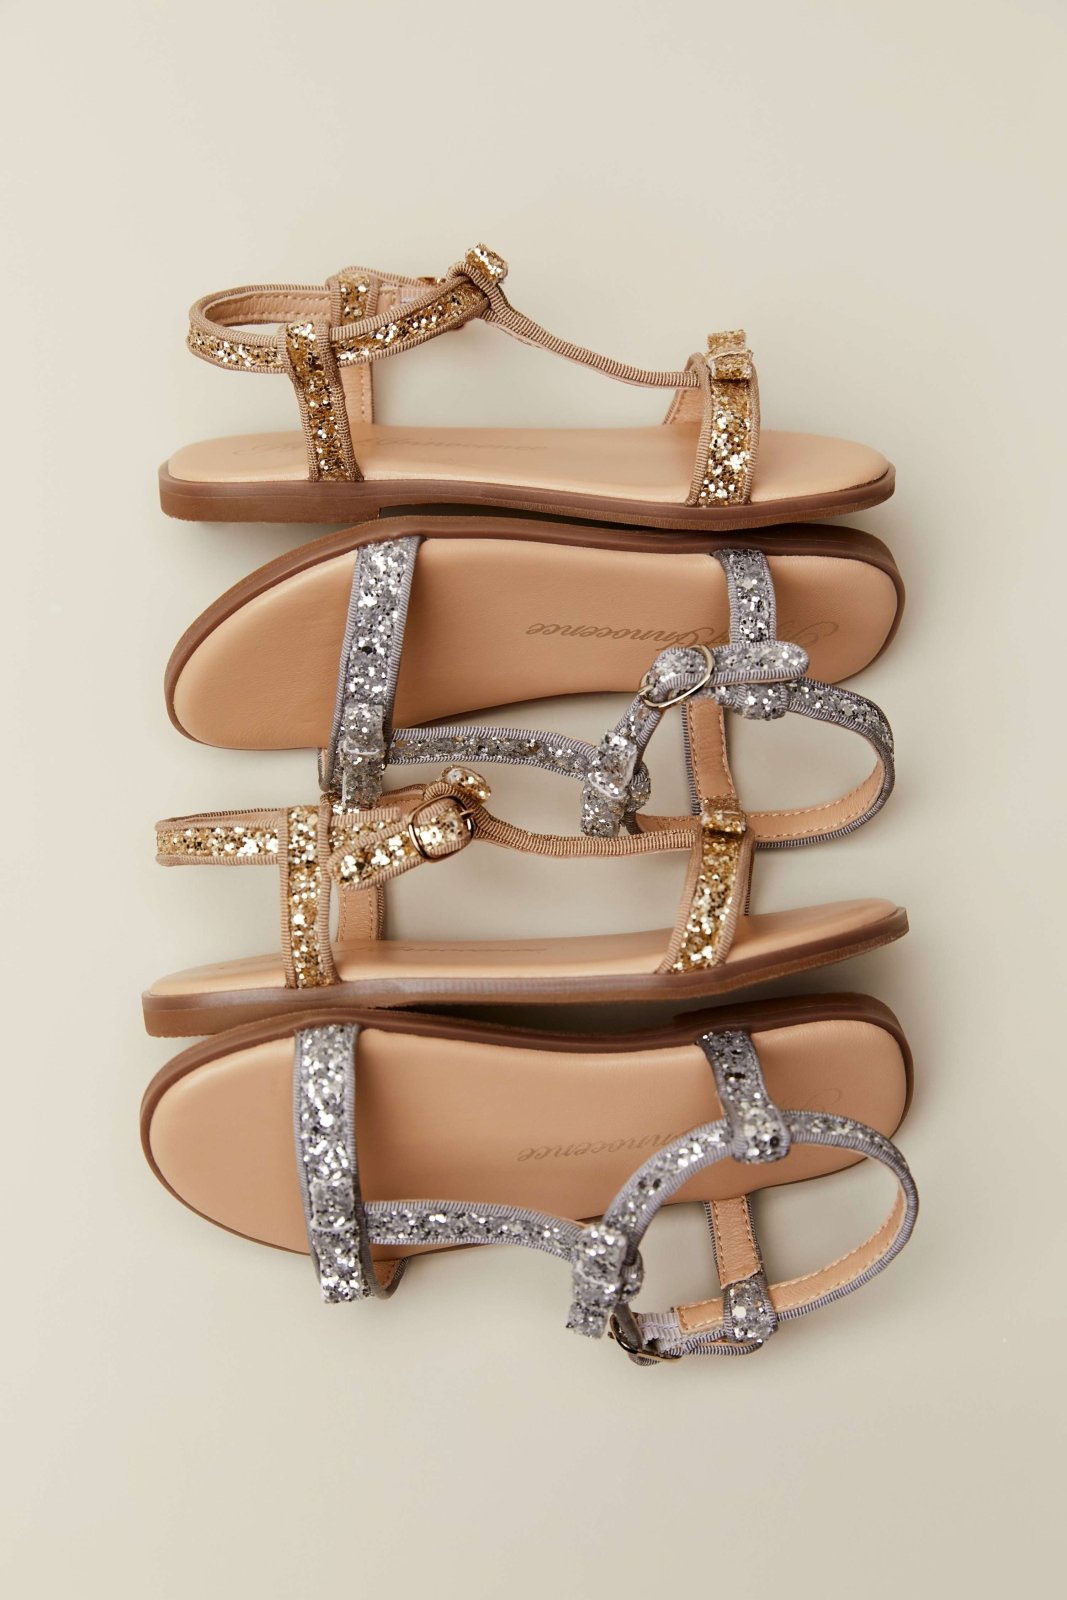 Nell Silver Sandals by Age of Innocence